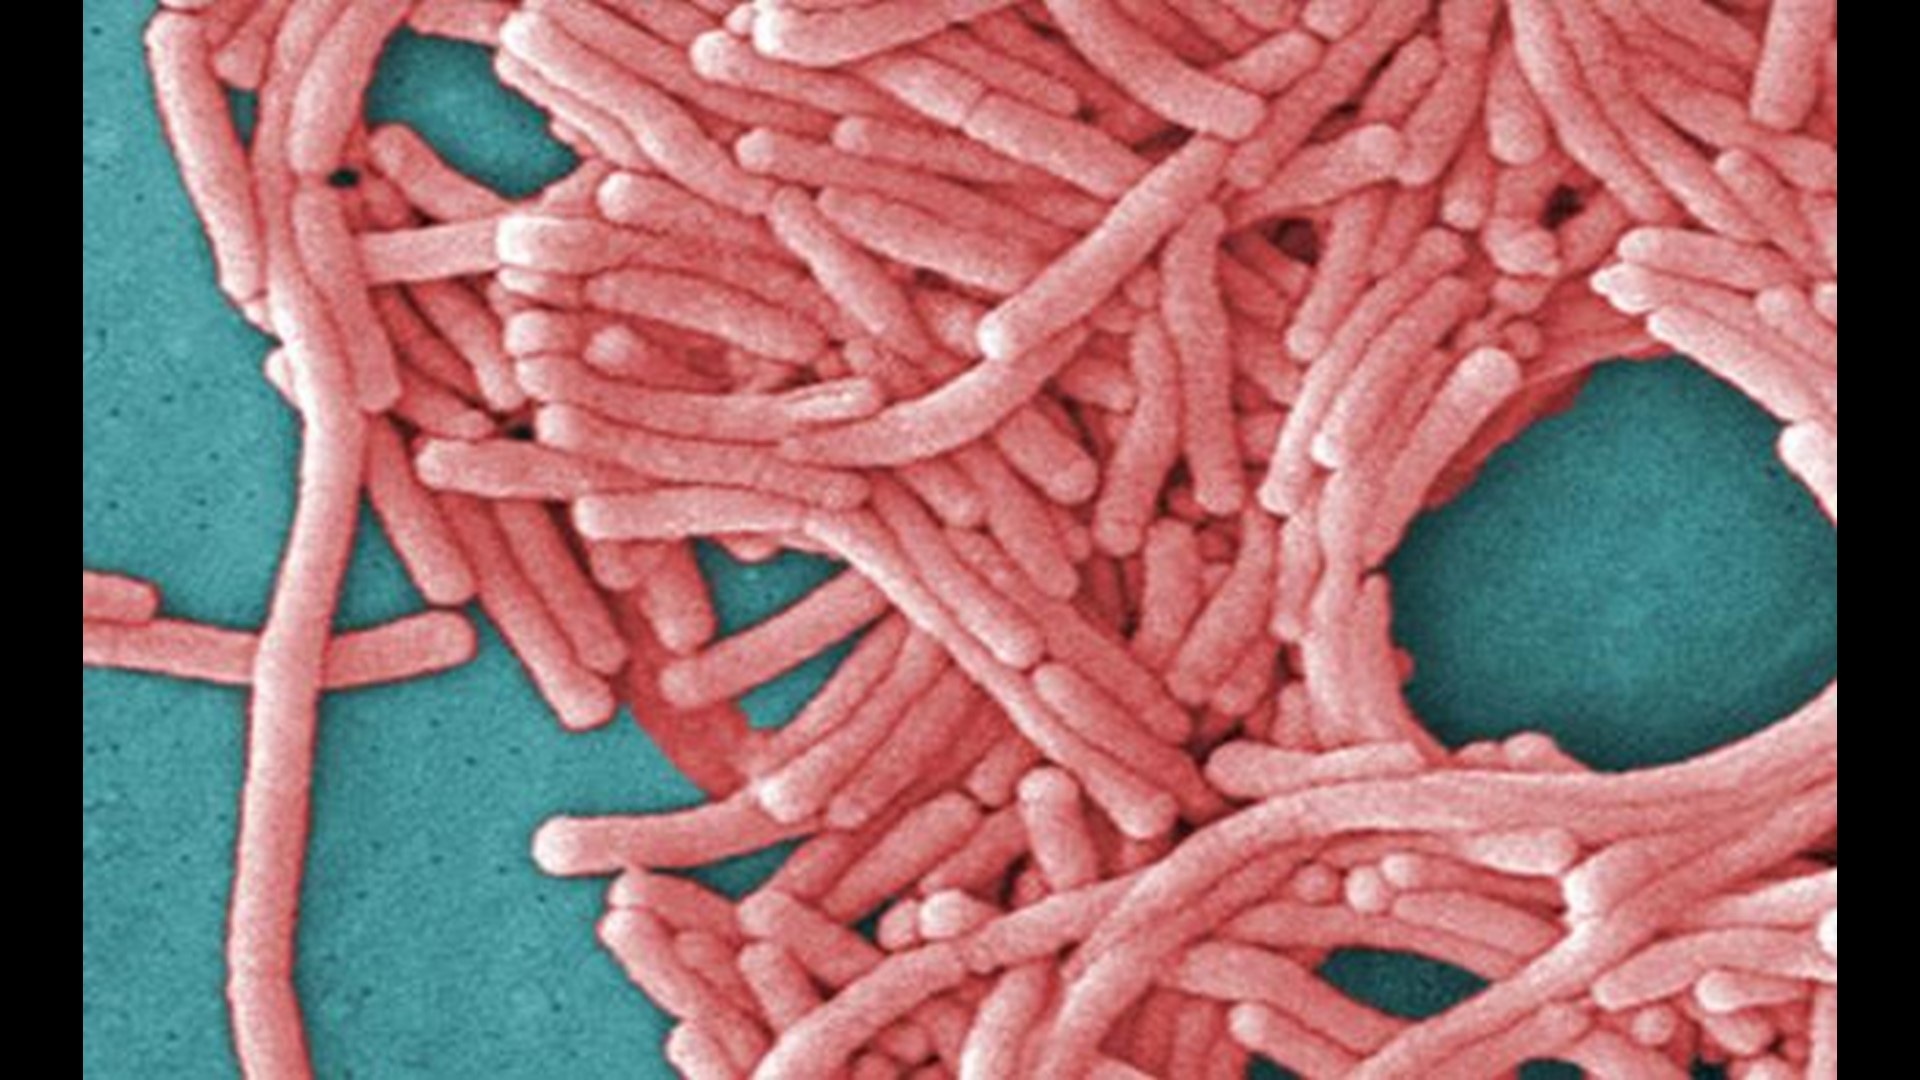 The Indianapolis Healthplex temporarily closed pending confirmation that the facility is free of legionella bacteria.